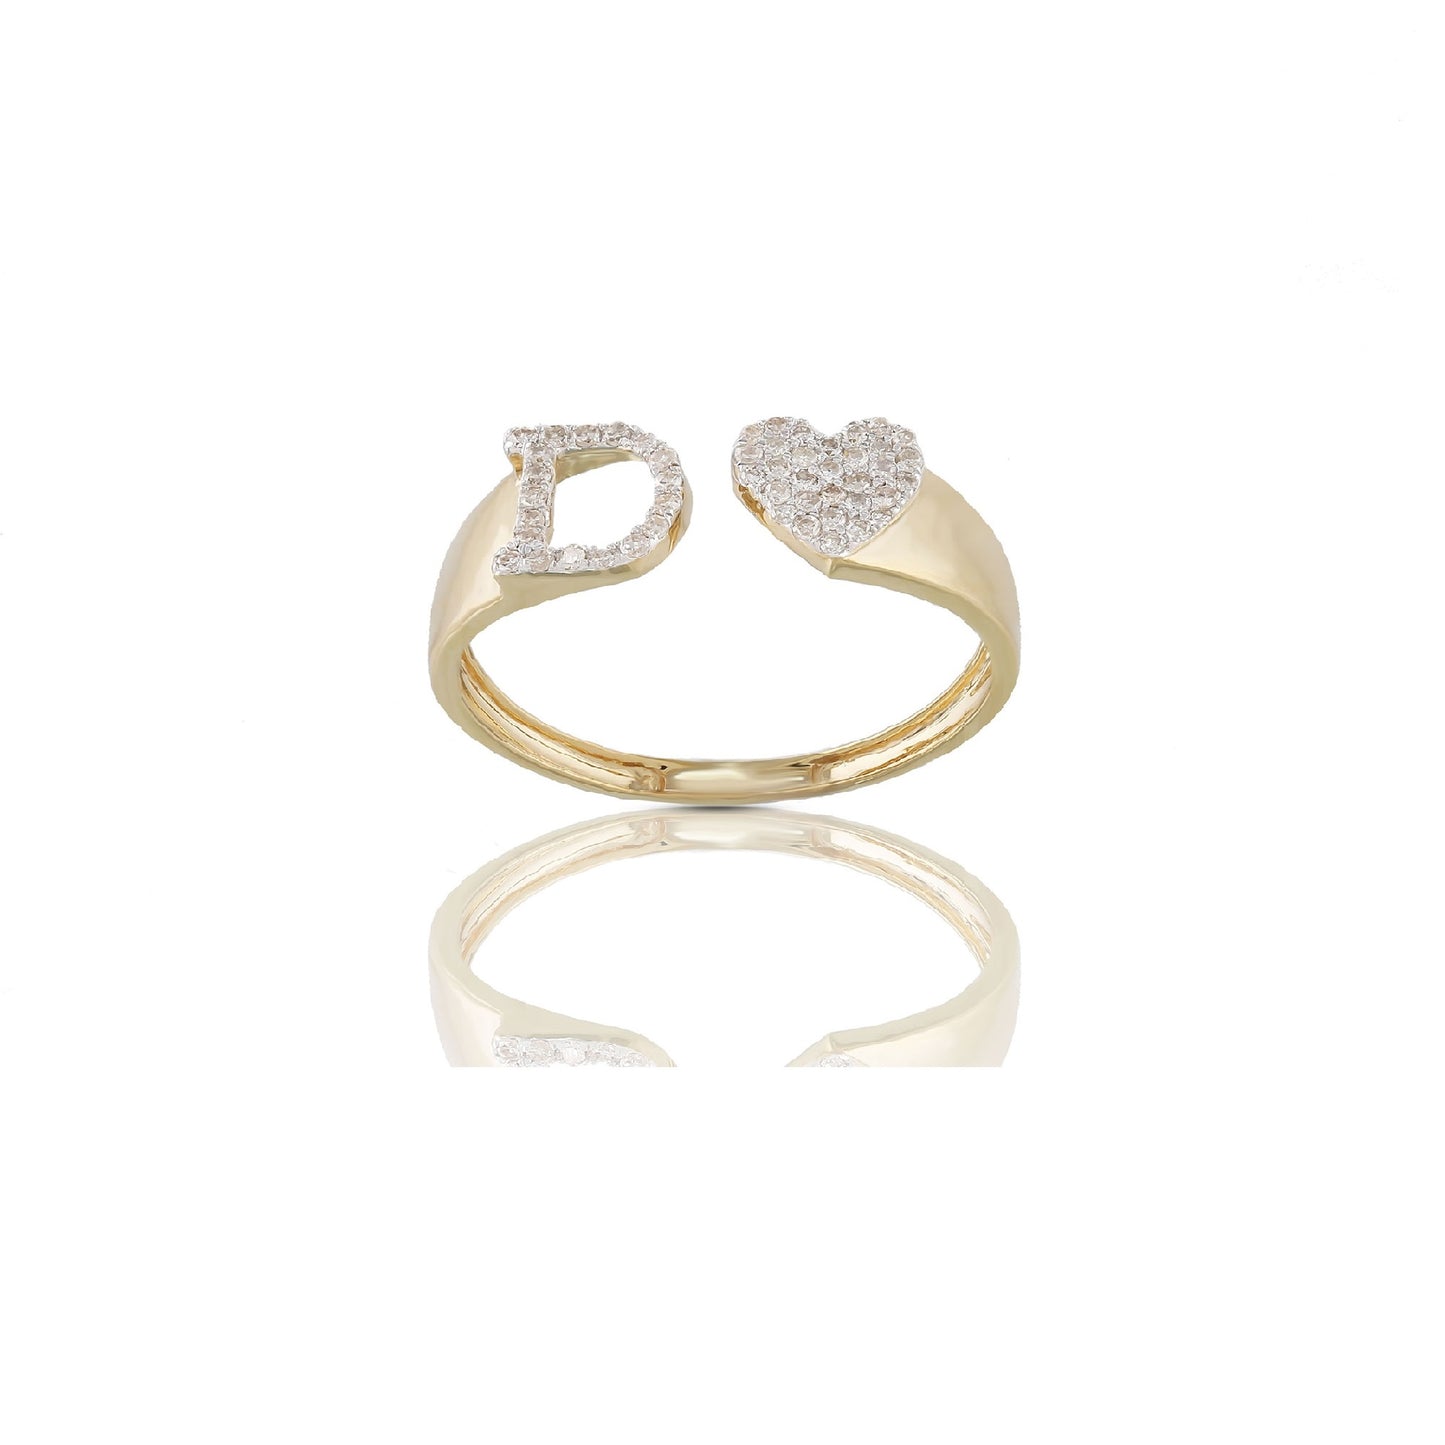 10KT Yellow Gold White Diamond Heart Initial Ring by Truth Jewel